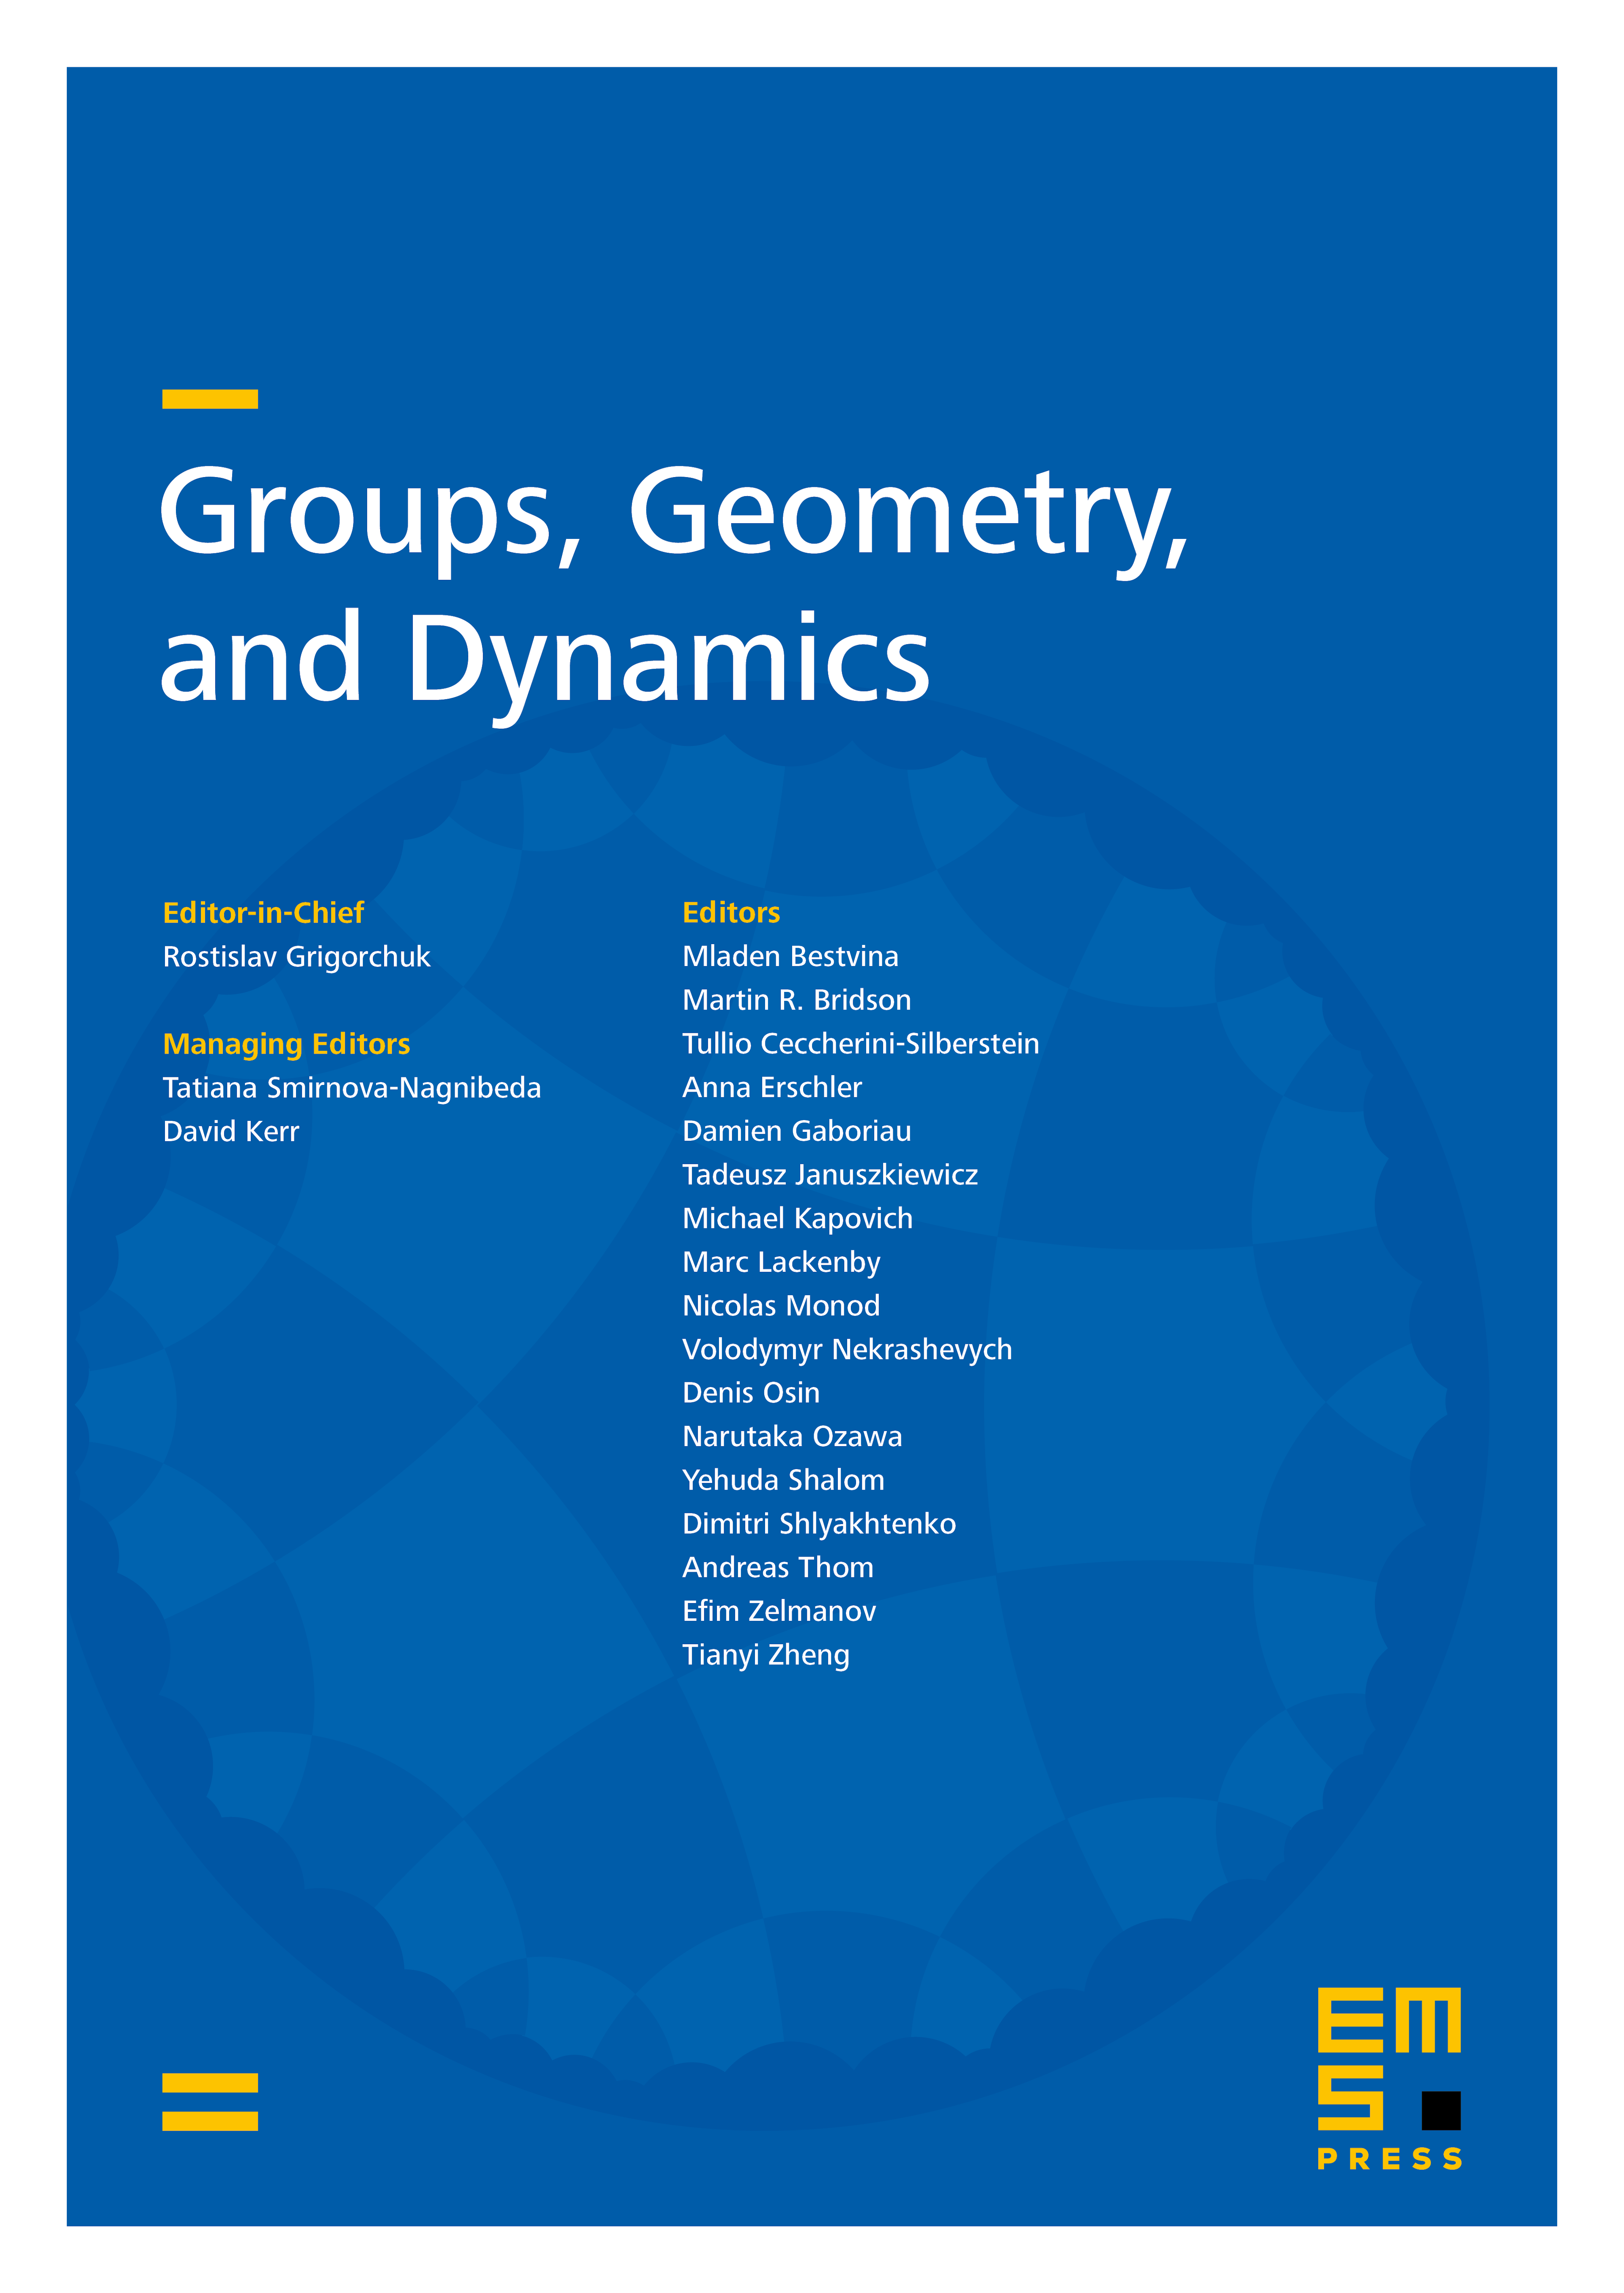 Free subgroups of 3-manifold groups cover